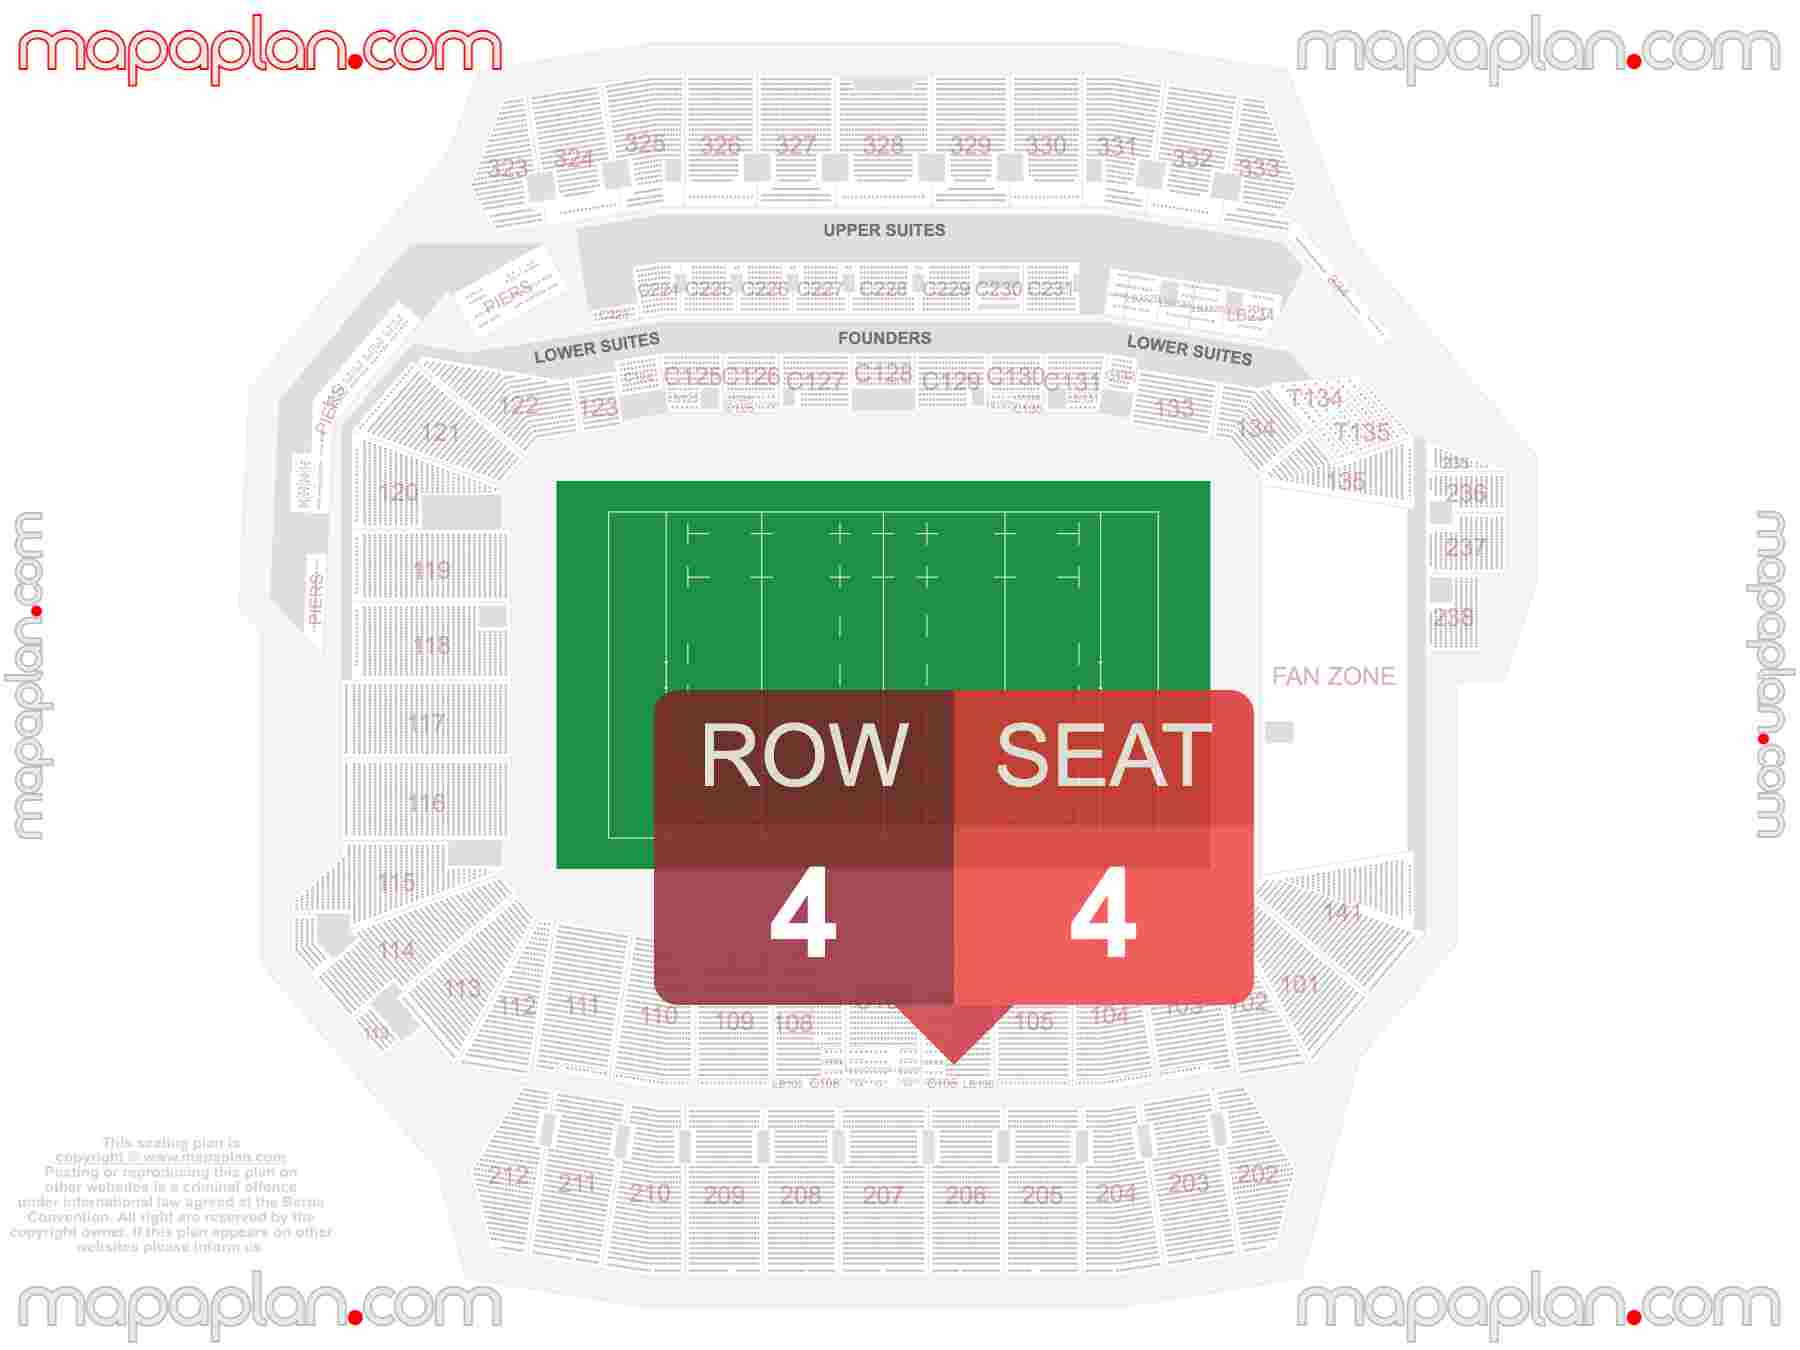 San Diego Snapdragon Stadium seating chart Rugby seating chart with exact section numbers showing best rows and seats selection 3d layout - Best interactive seat finder tool with precise detailed location data